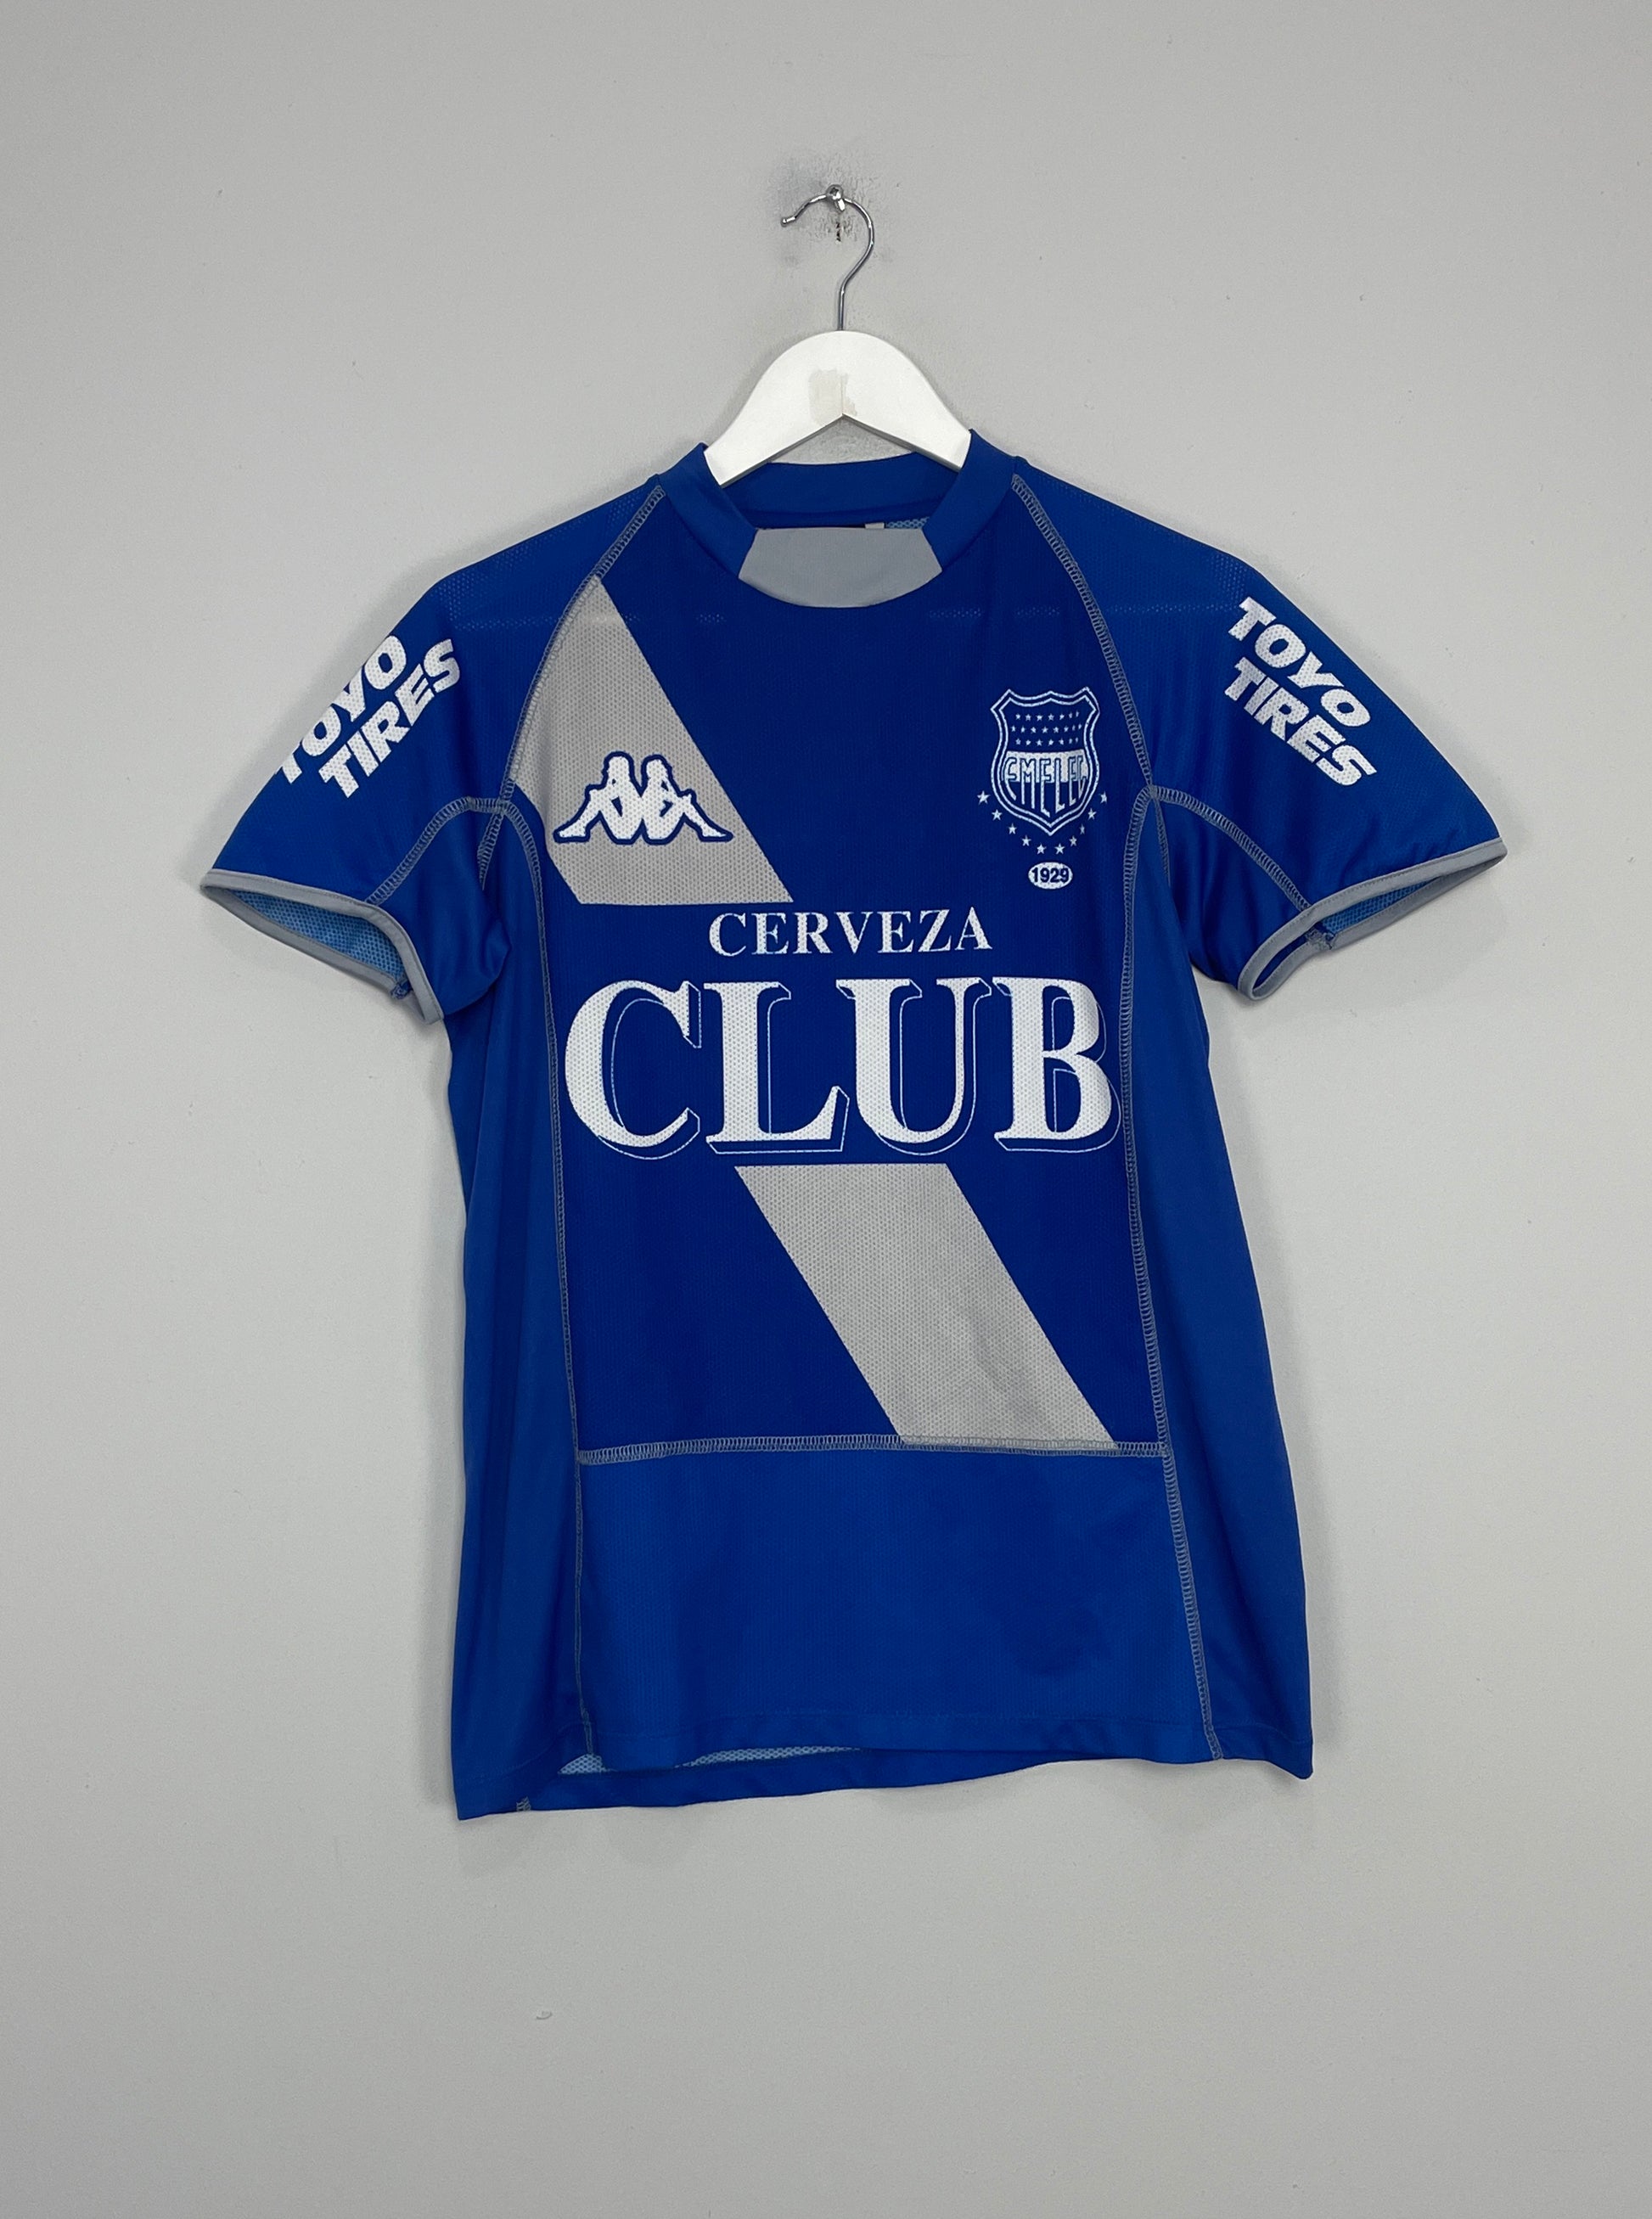 Image of the Emelec shirt from the 2005/06 season